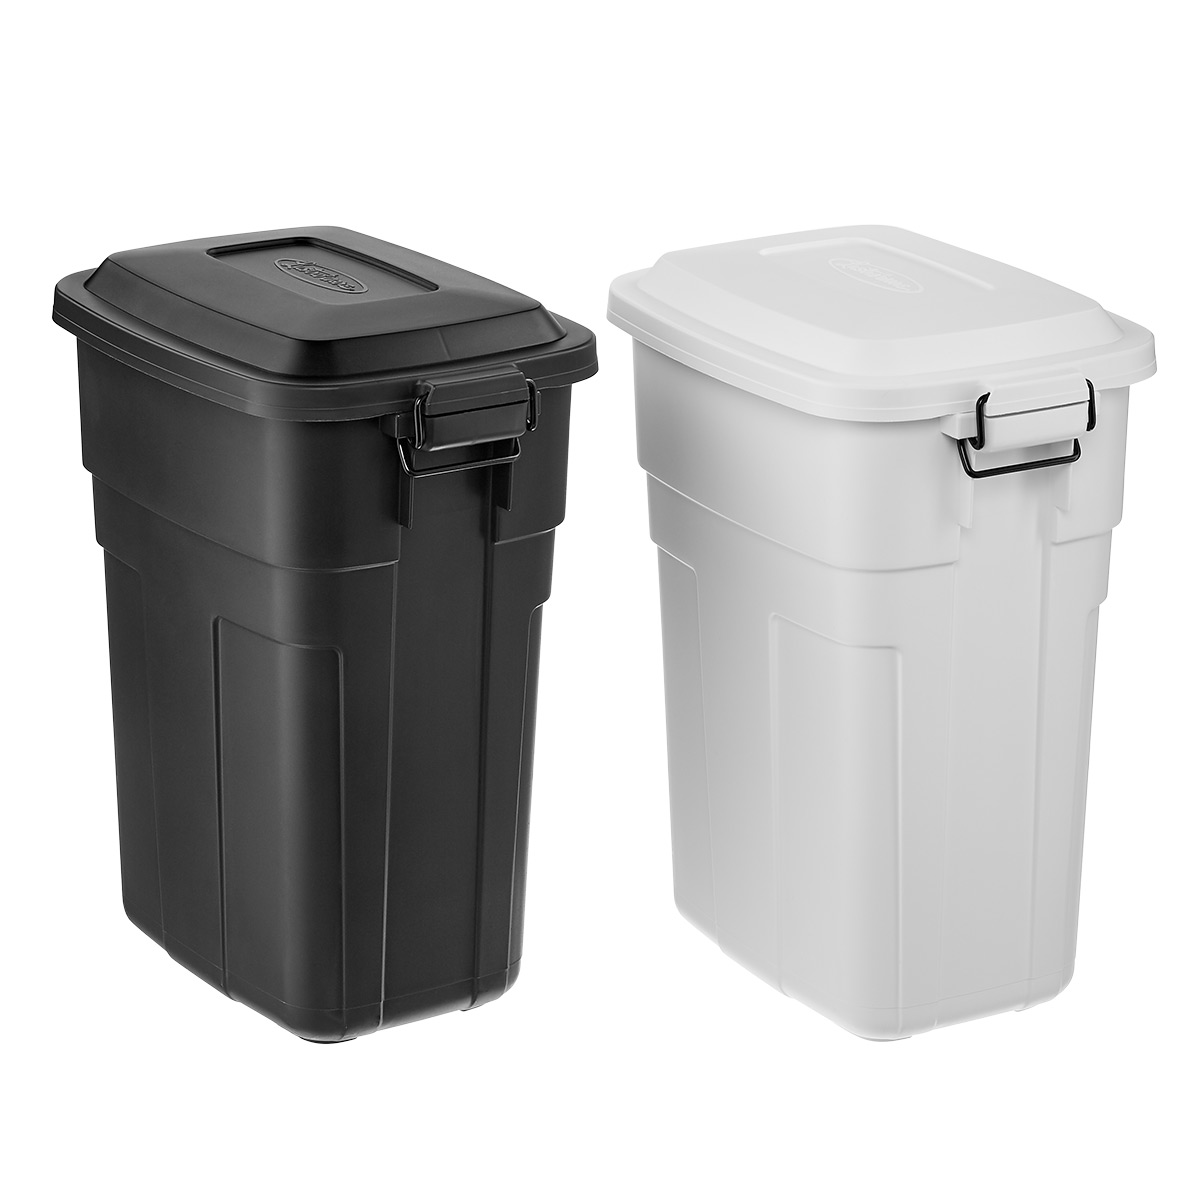 https://www.containerstore.com/catalogimages/409022/10083563g-lustroware_black_white_30L.jpg